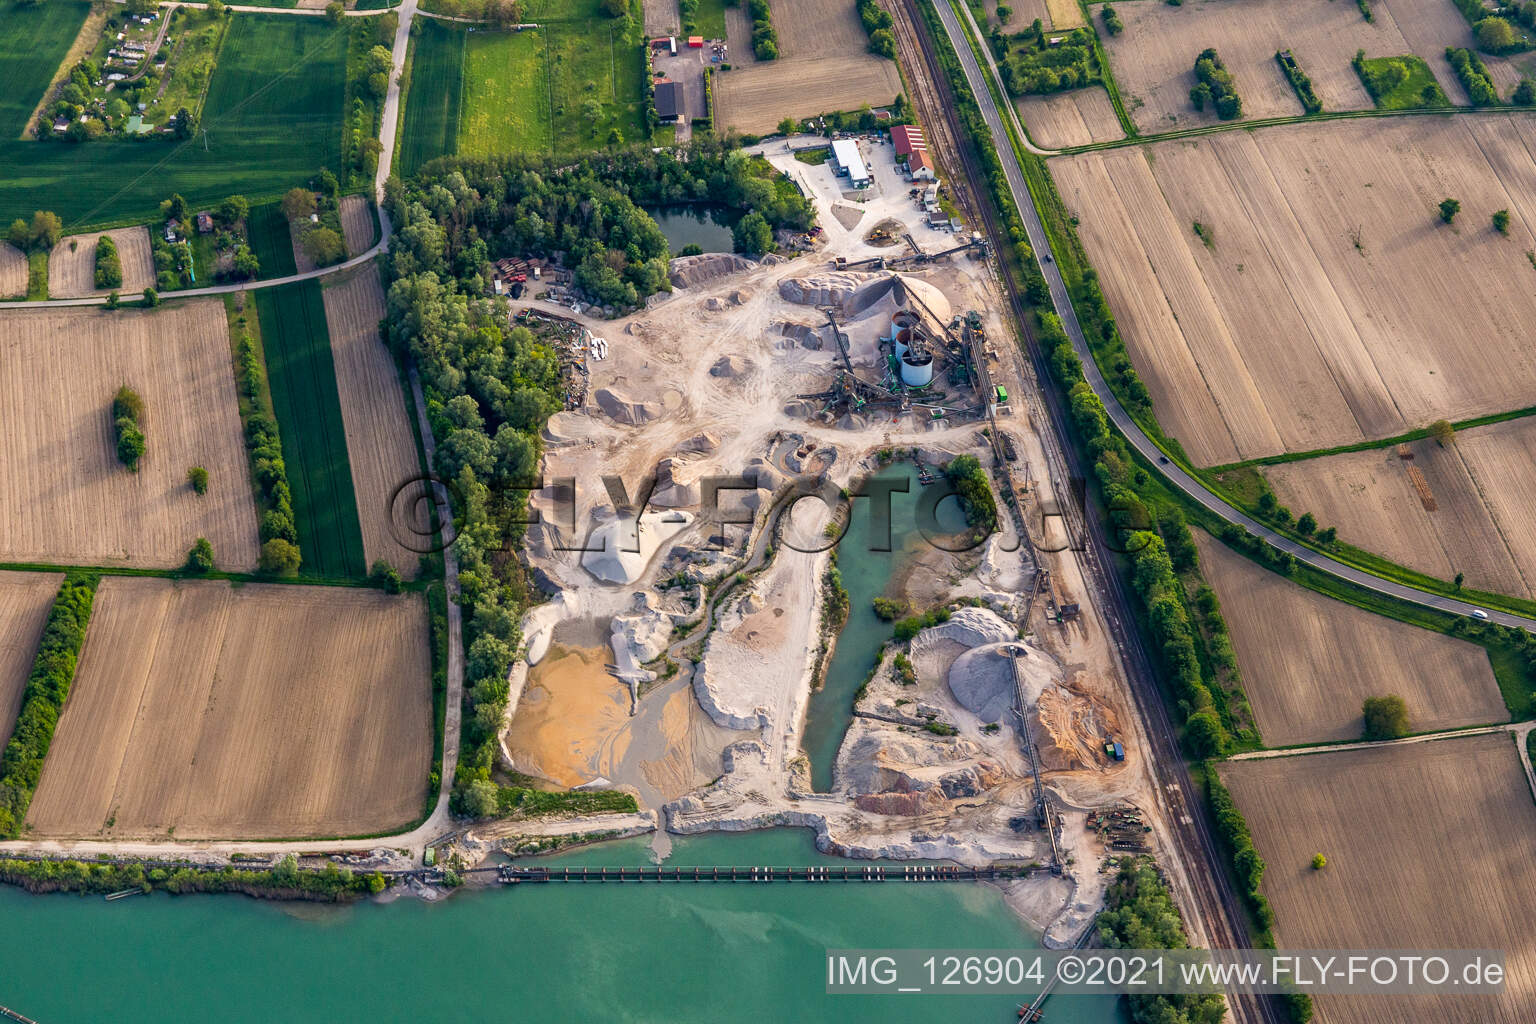 Aerial view of HBM Hagenbacher Bau minerals quarry lake in Hagenbach in the state Rhineland-Palatinate, Germany